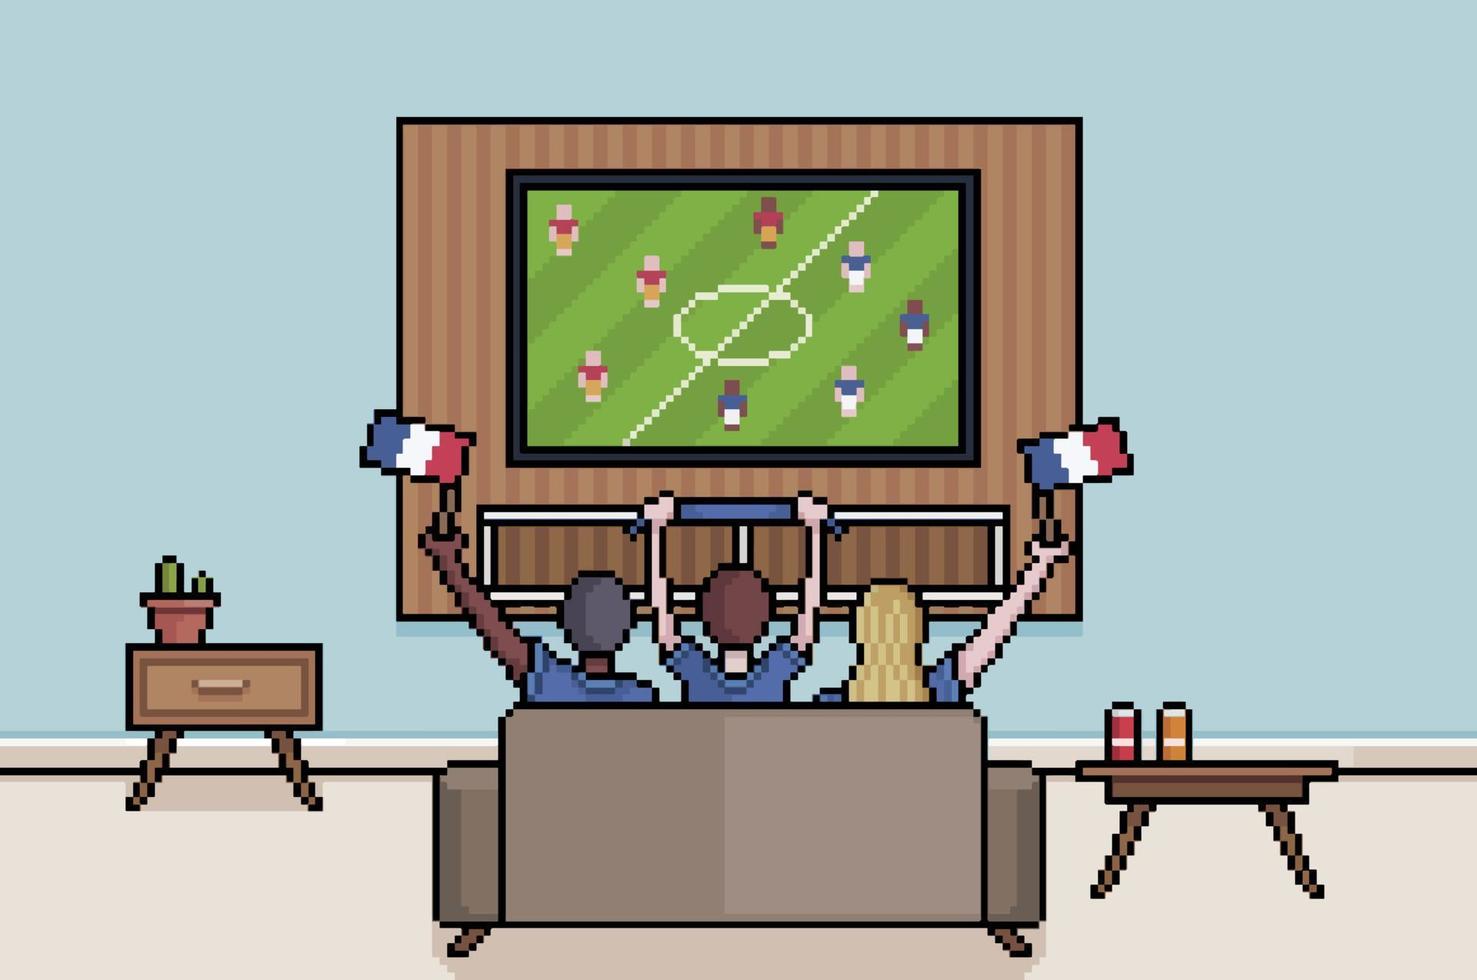 Pixel art fans watching football on tv in living room French people watching the world cup 8bit background of people watching soccer world cup vector